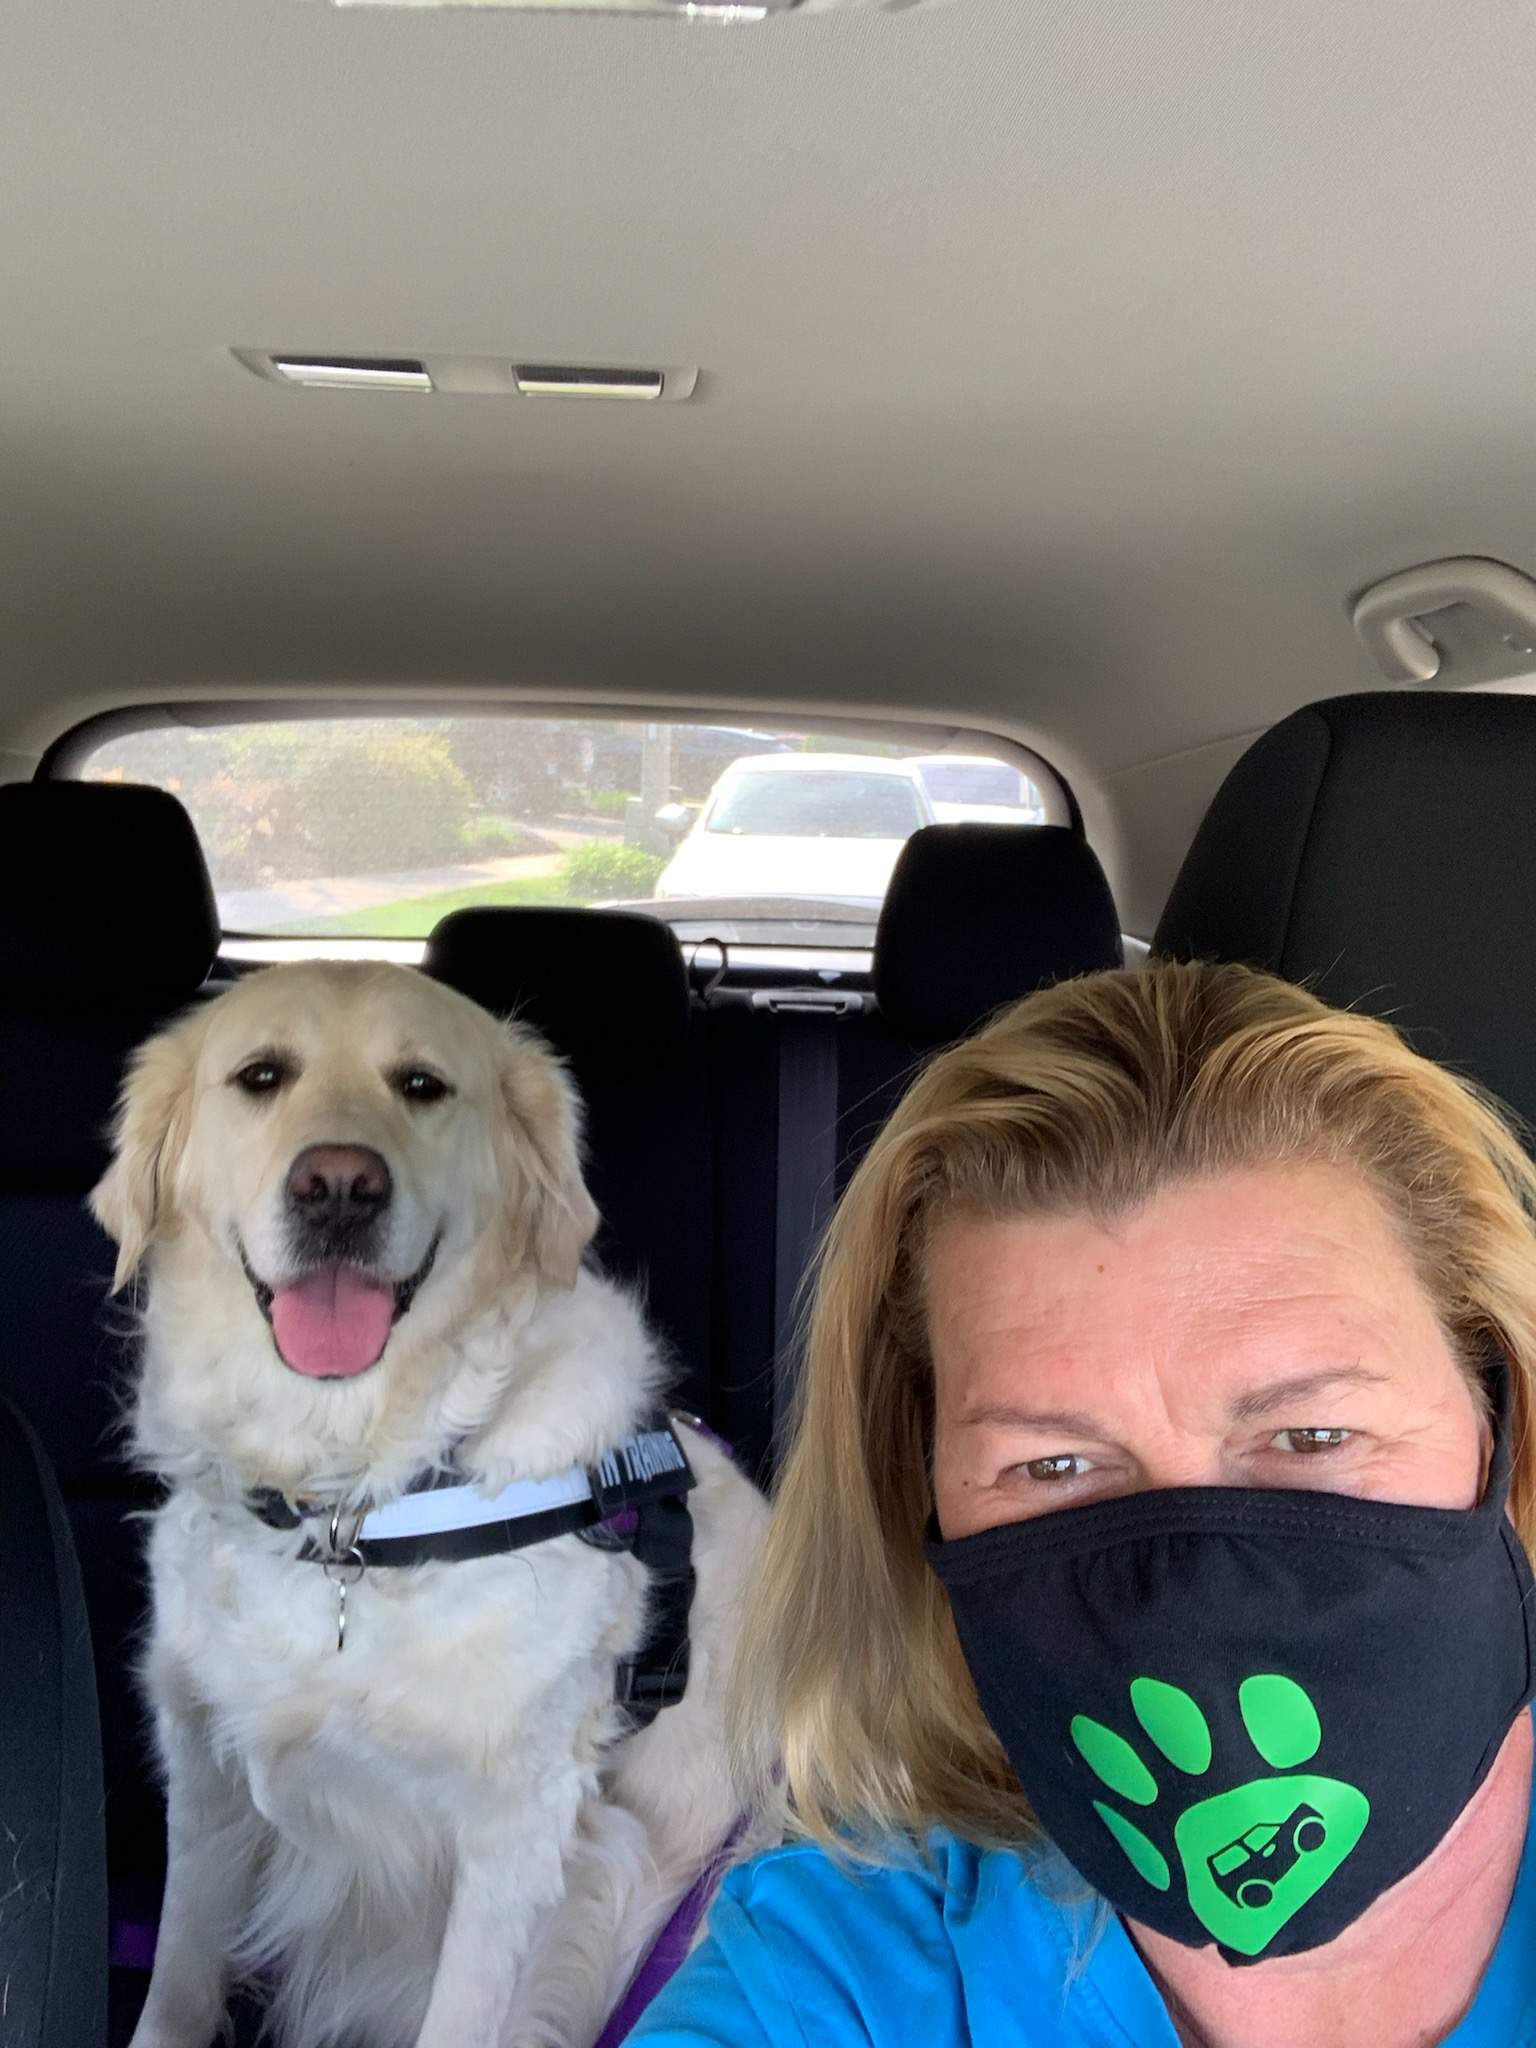 A golden retriever sits in the back seat of a car. In the front, a person takes a selfie while wearing a face covering that has a paw print logo on it